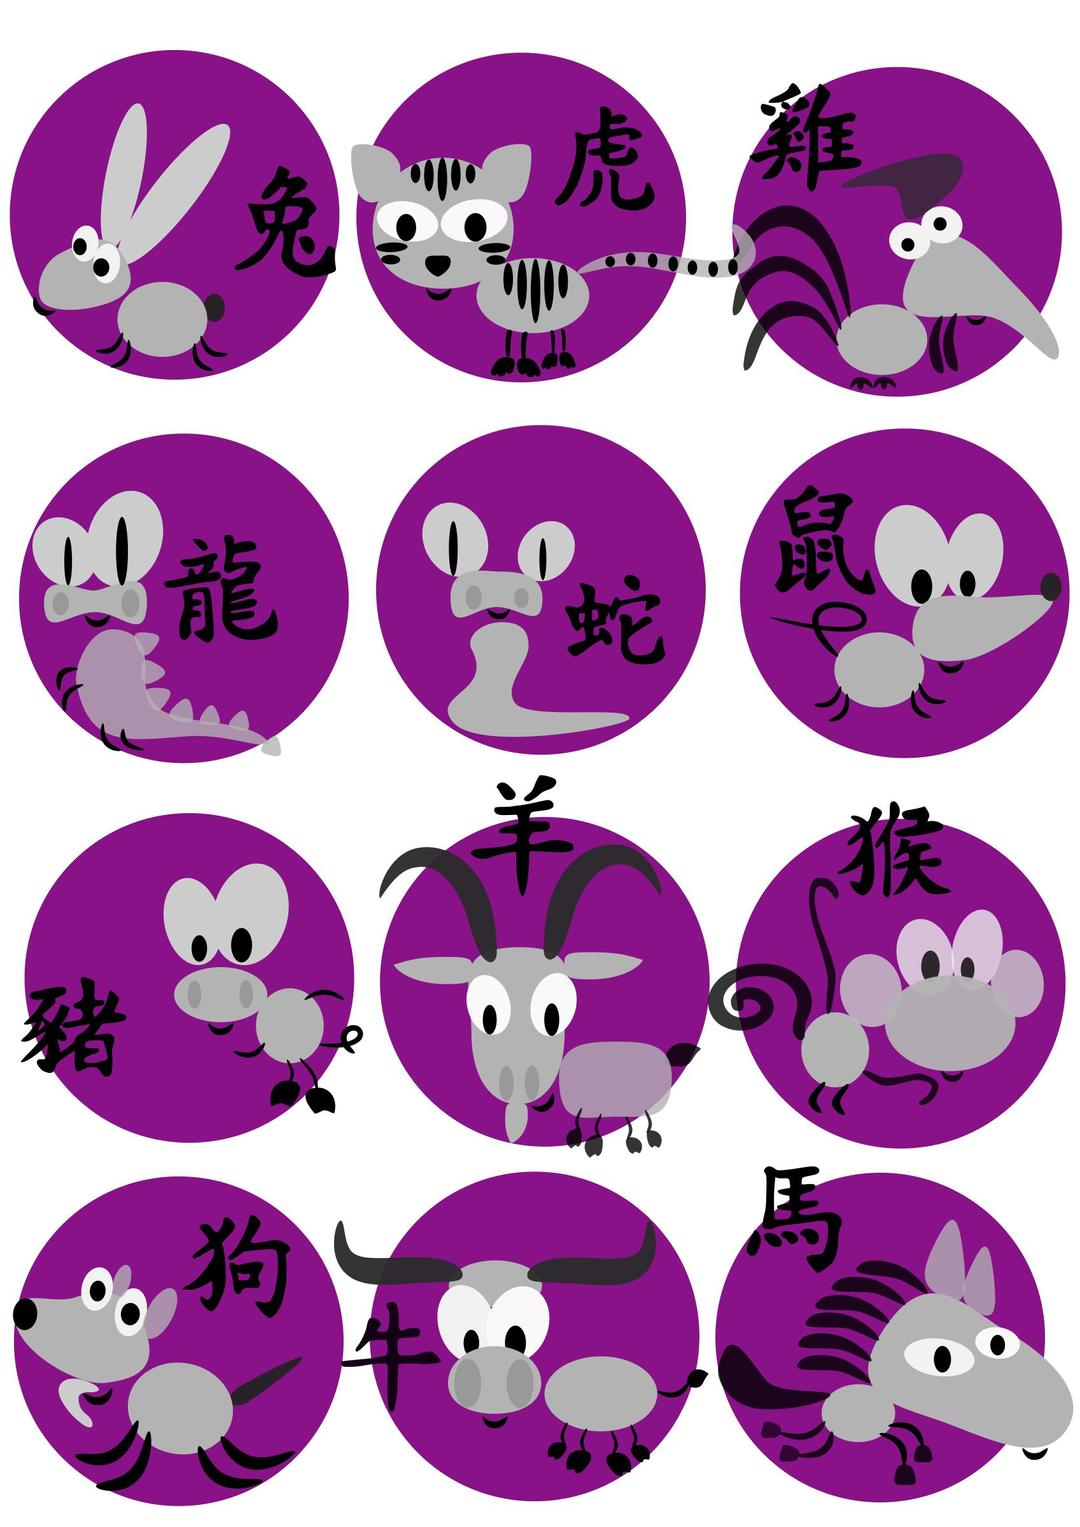 Chinese horoscope animals png transparent